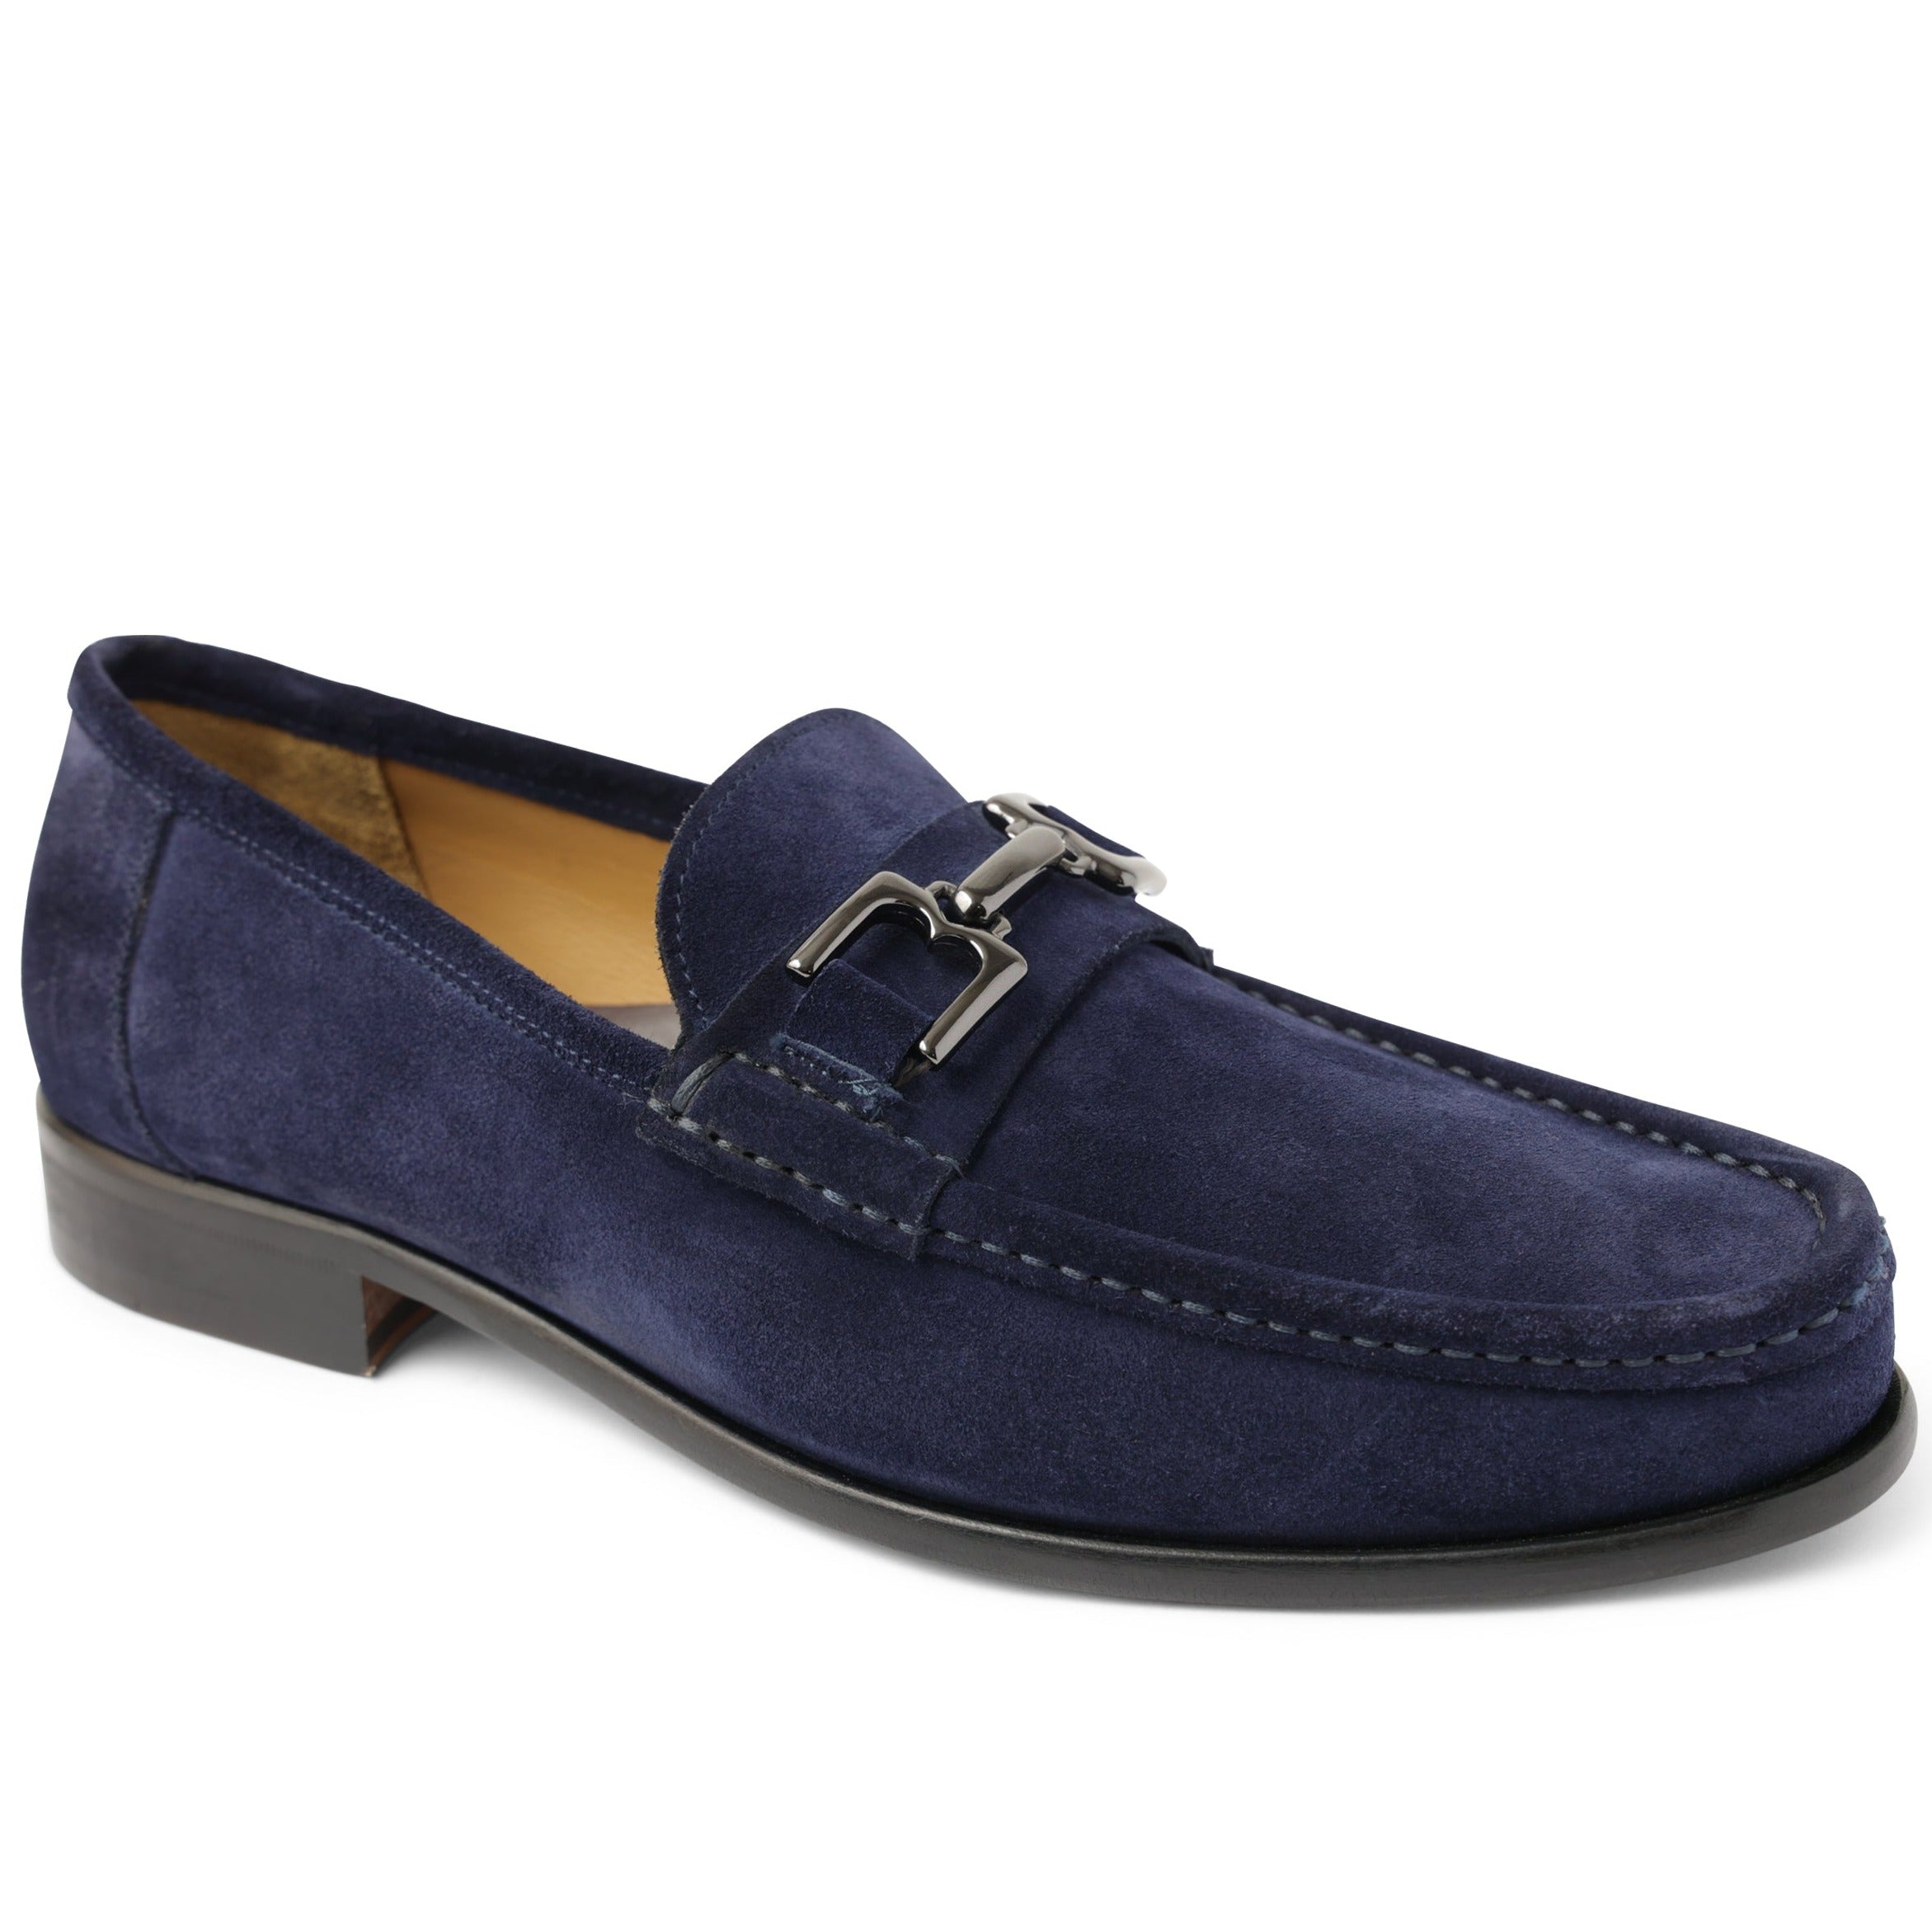 Image of Trieste Classic Leather Moccasin - Navy Suede